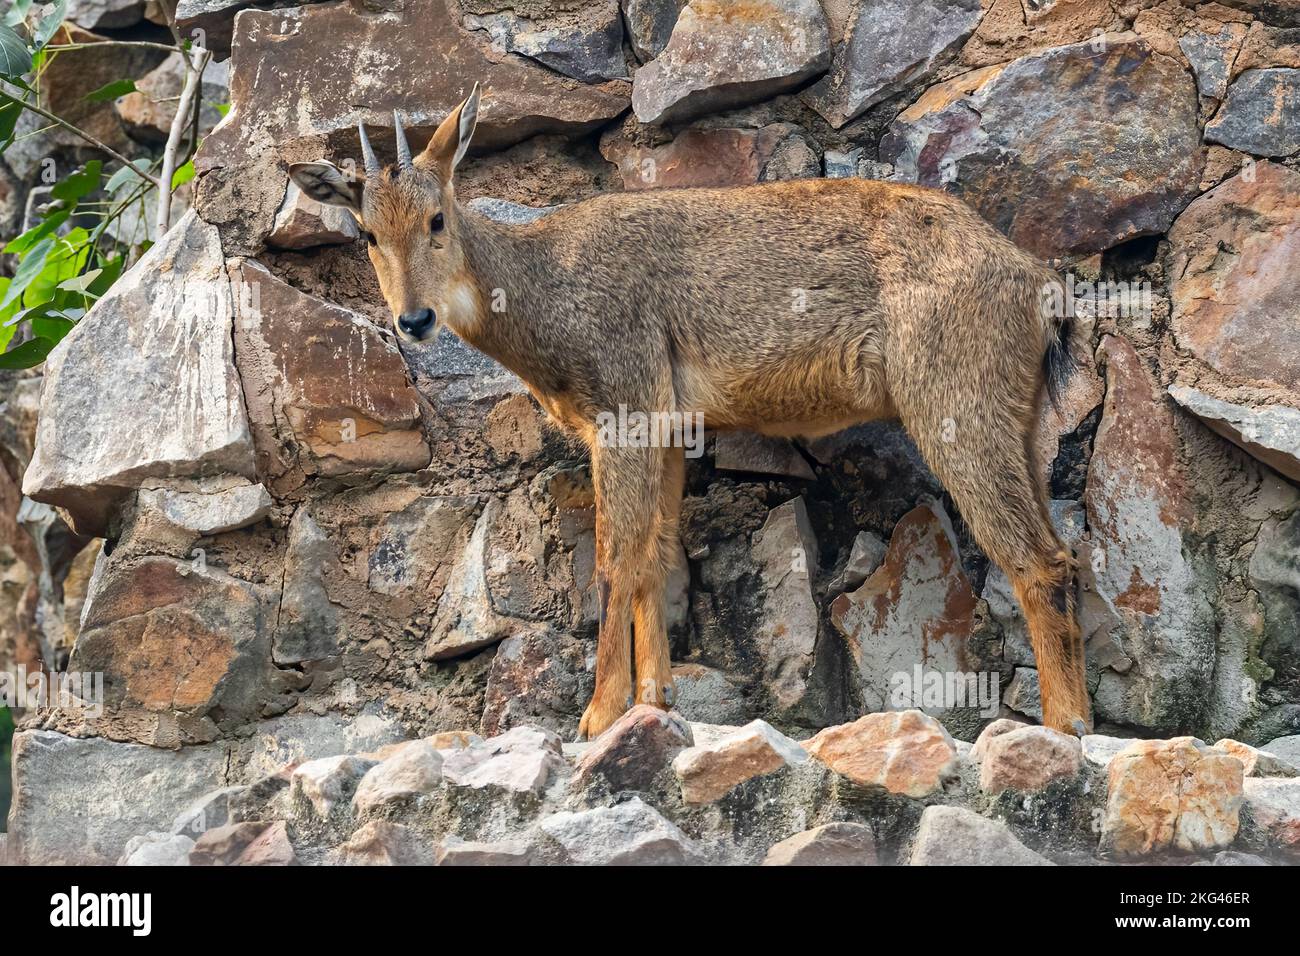 A Red Goral Looking towards camera Stock Photo